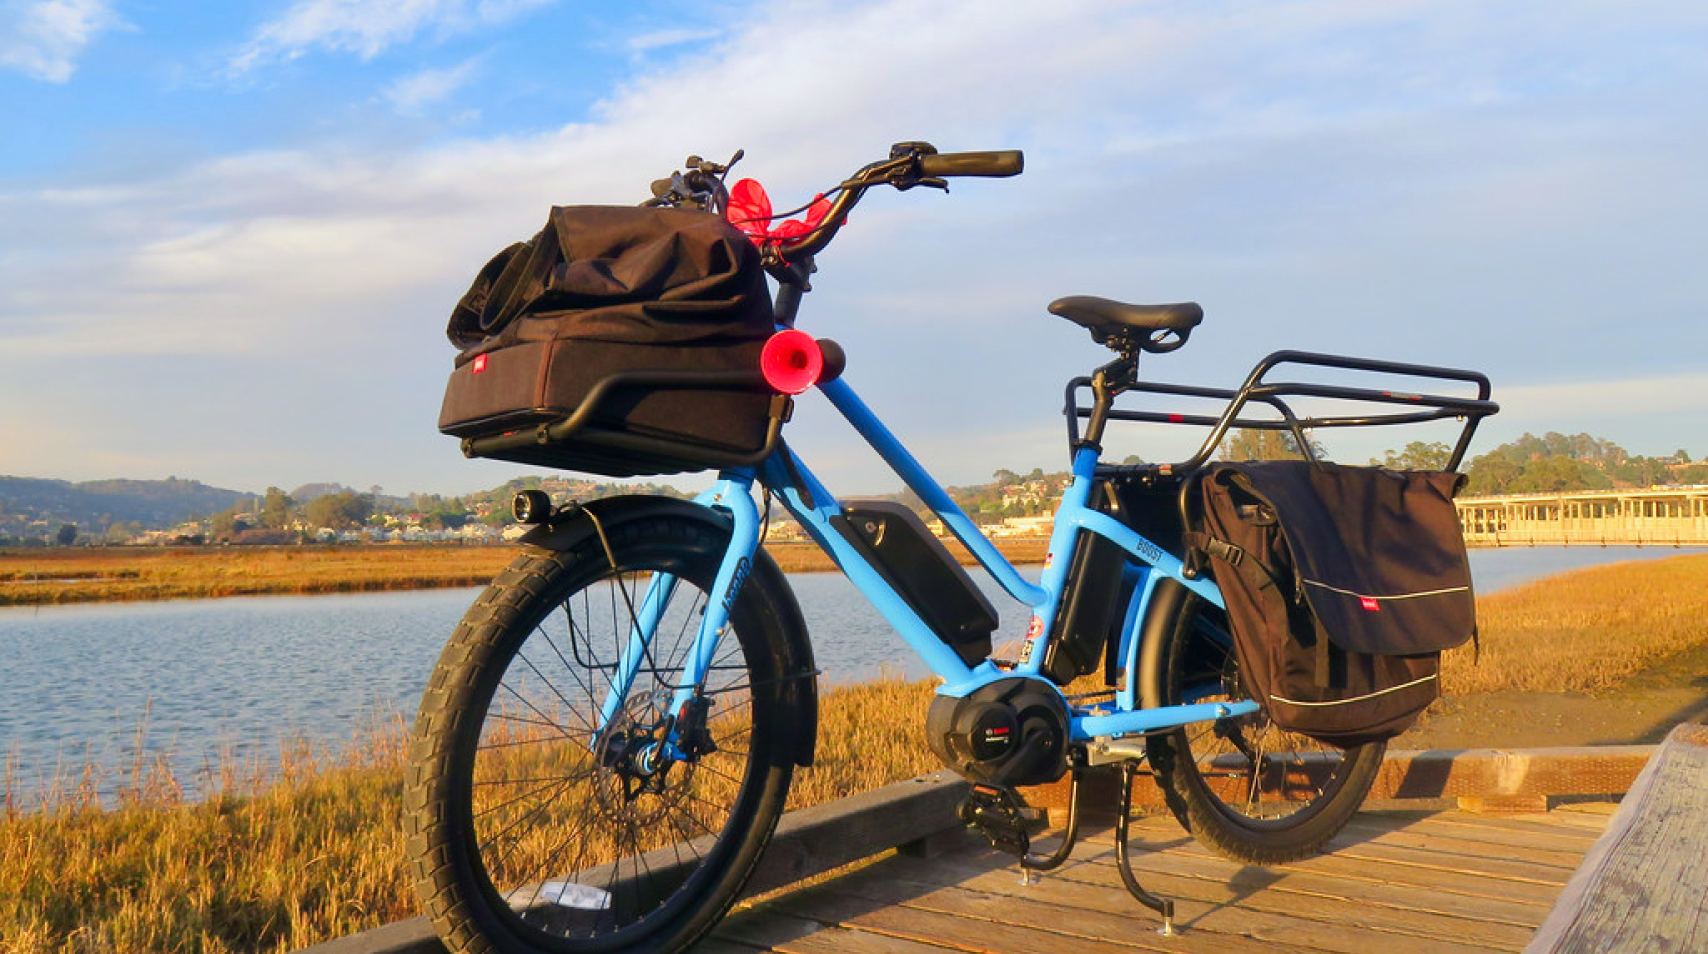 wondering-how-to-choose-an-ebike-here-are-five-tips-for-first-time-shoppers